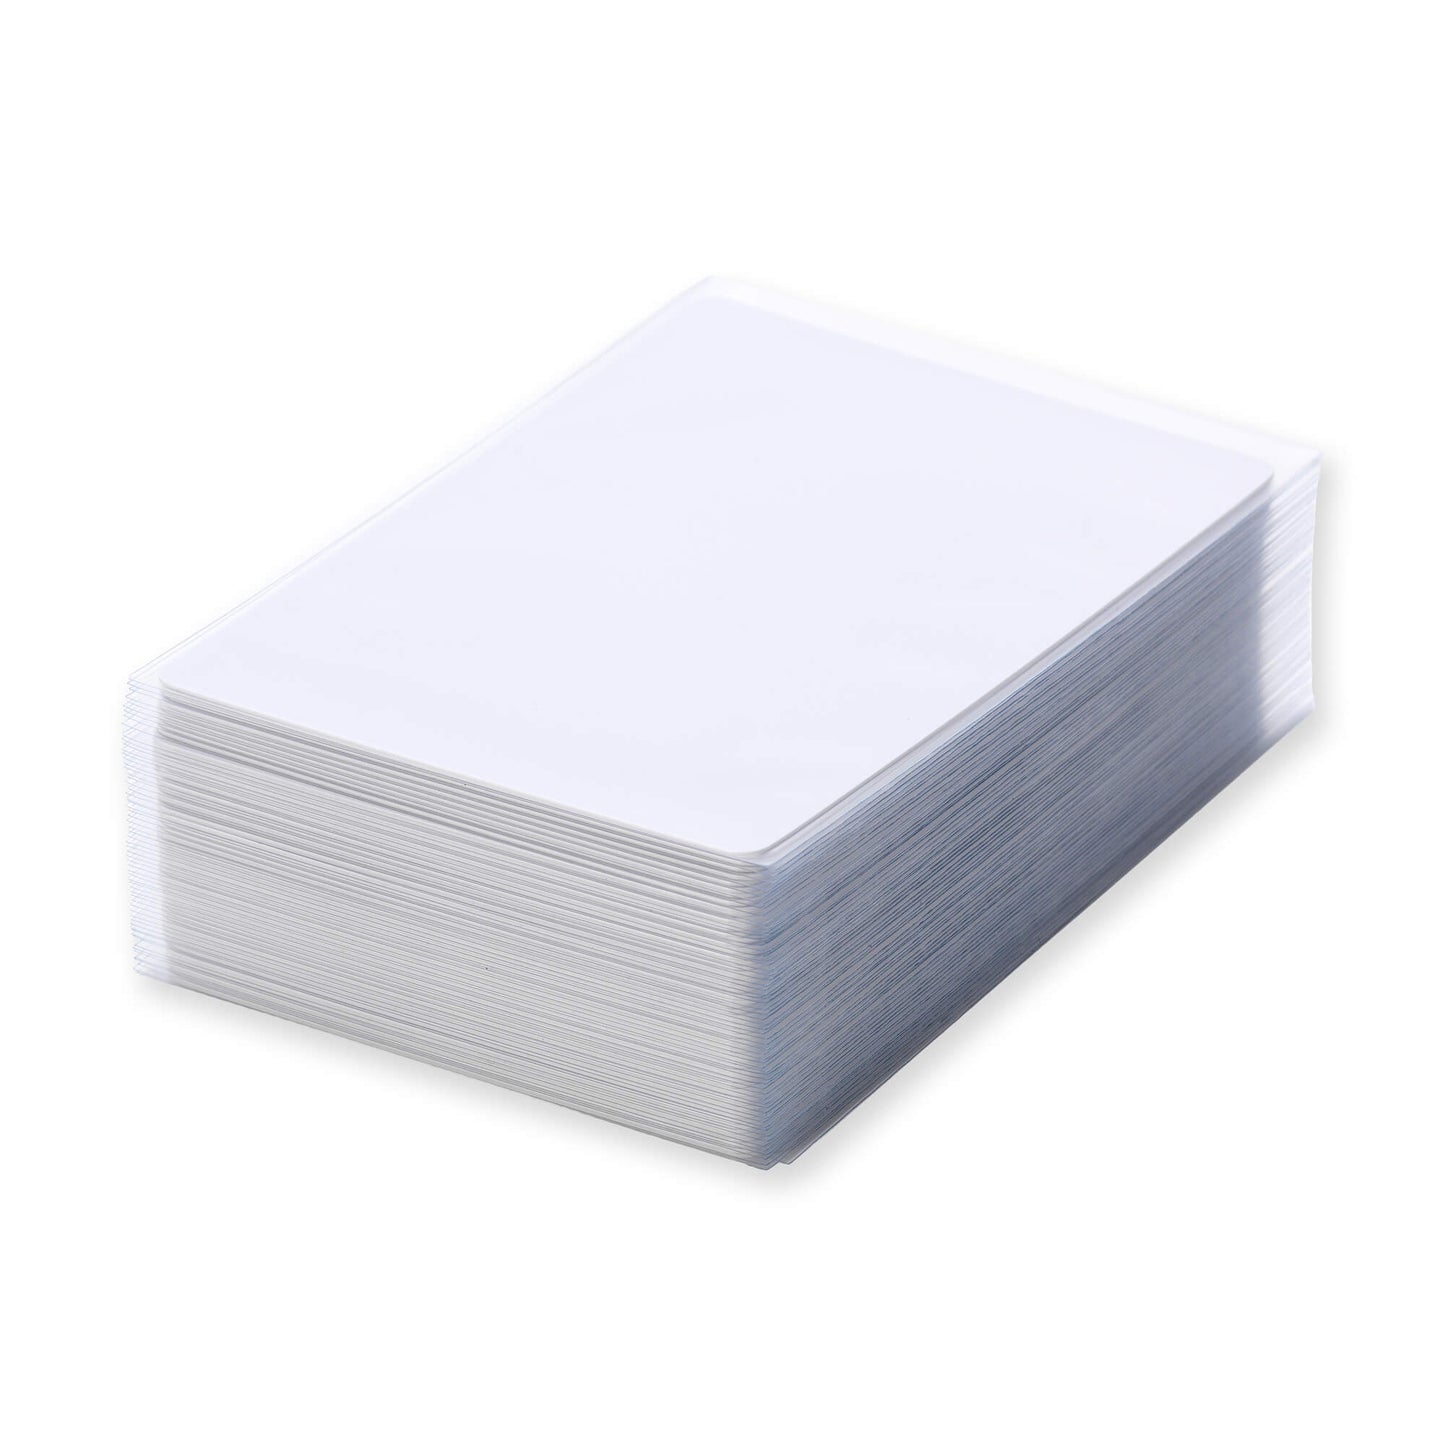 VAULT X SOFT CARD SLEEVES (200 PACK)